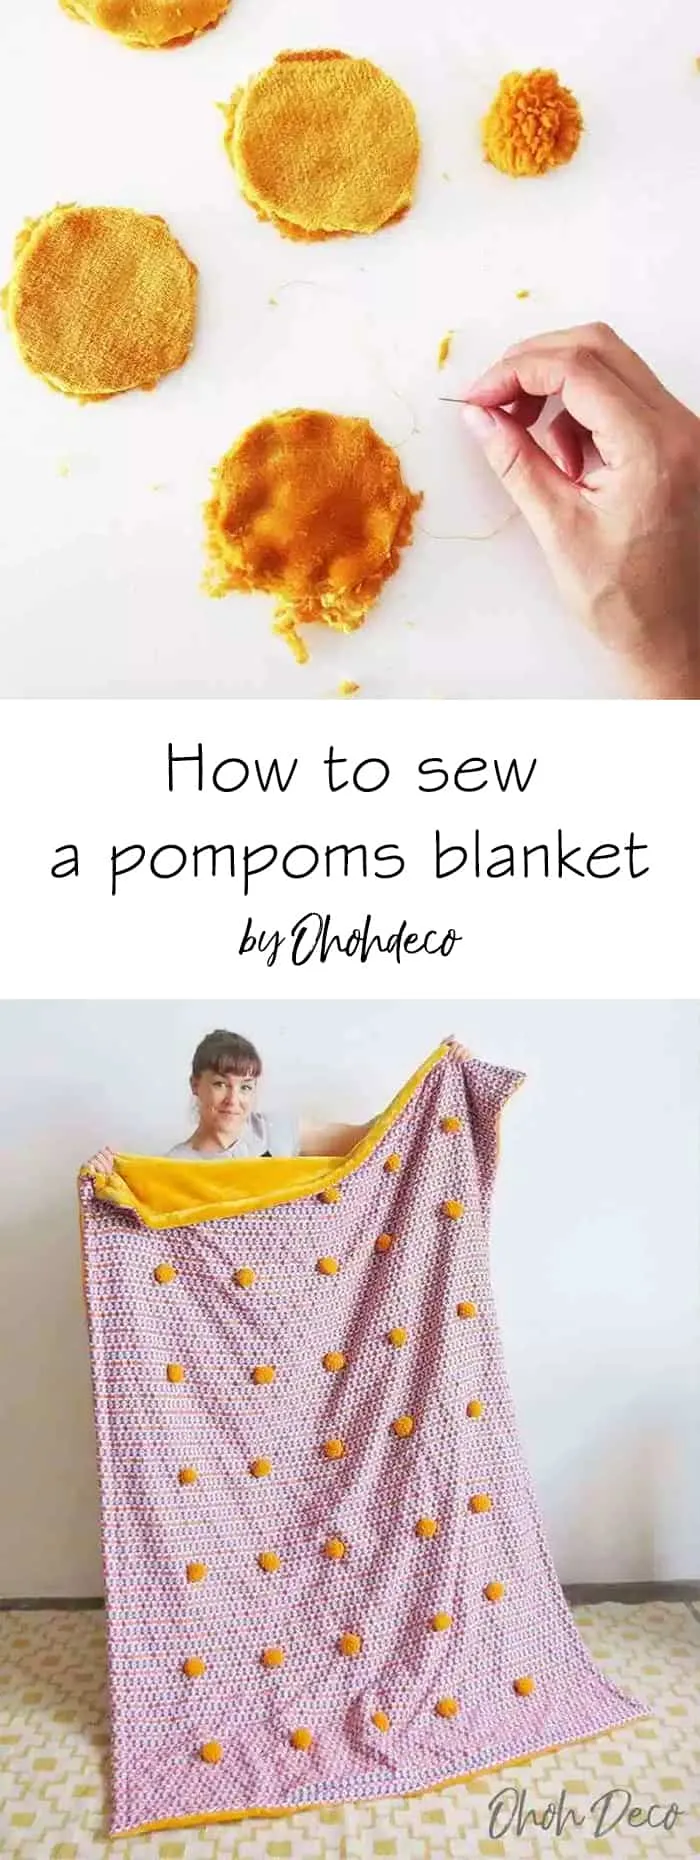 how to sew a pompoms blanket